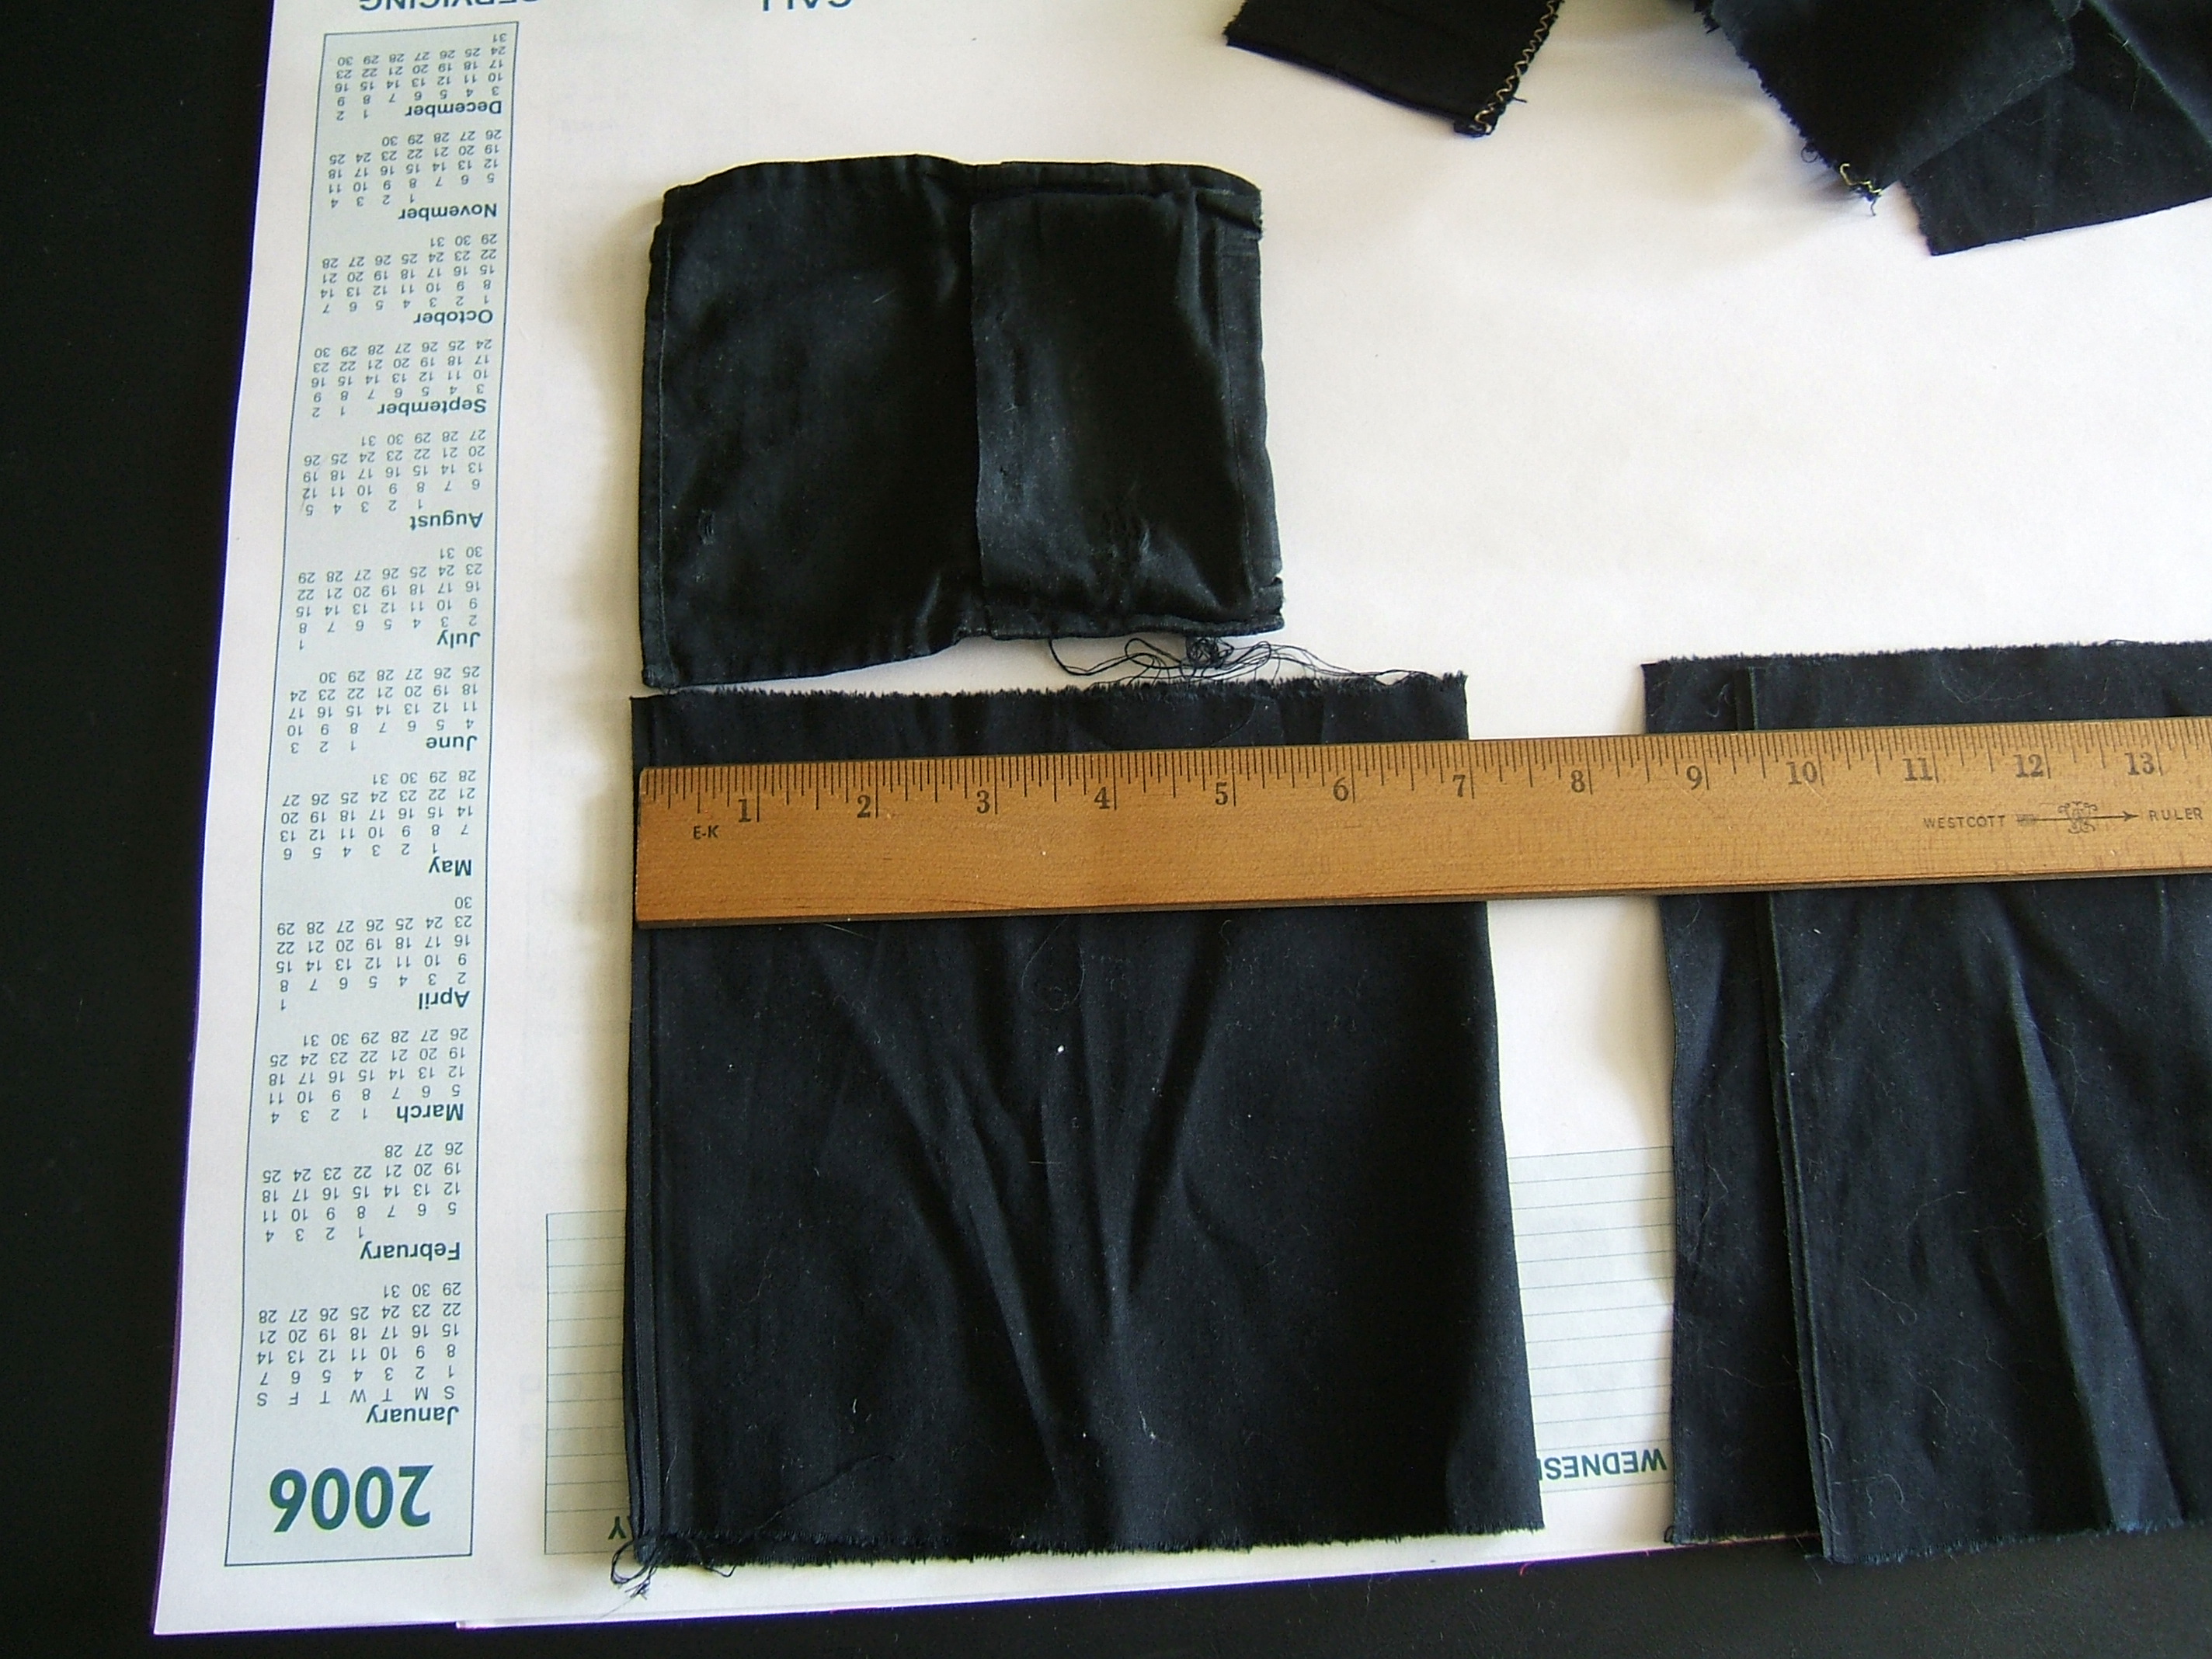 ruler on proposed body, wallet above, pocket scraps to the side